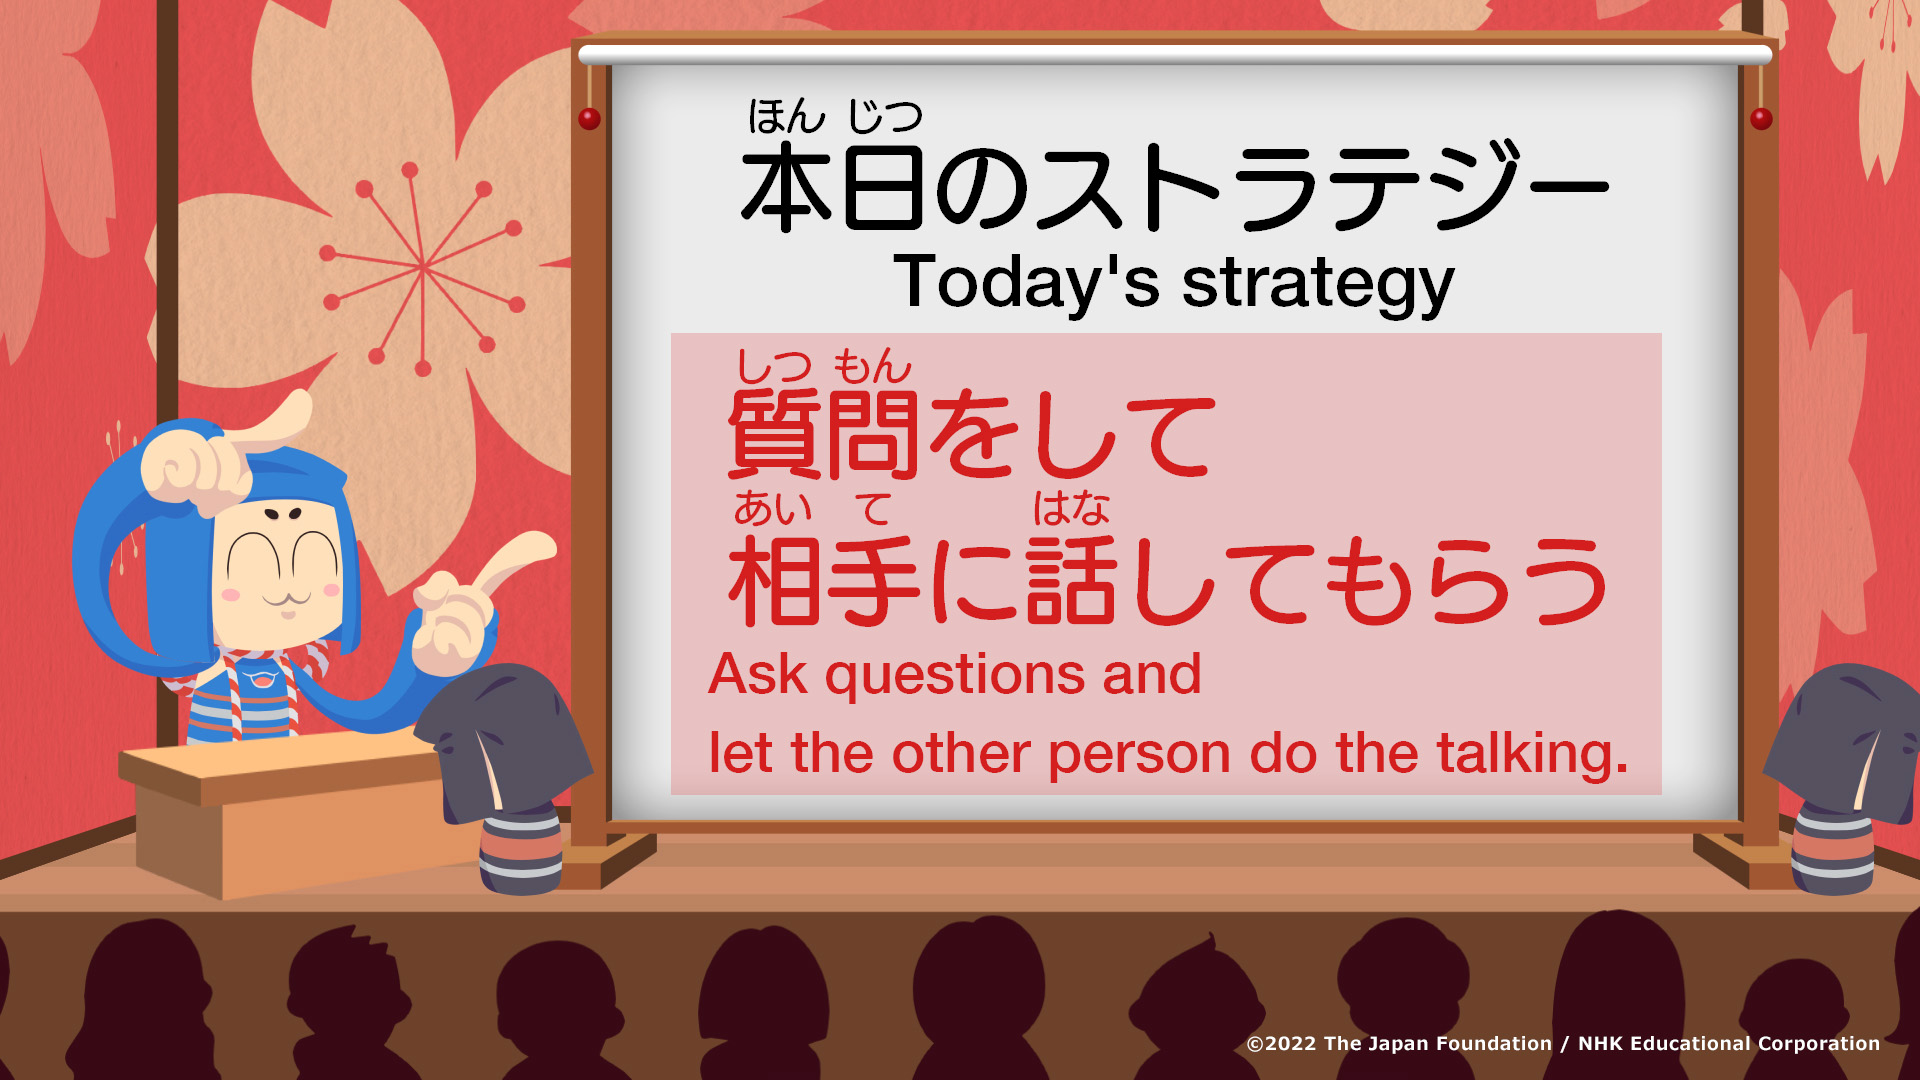 Image of “本日のストラテジー Today's strategy 質問をして相手に話してもらう Ask questions and let the other person do the talking.”